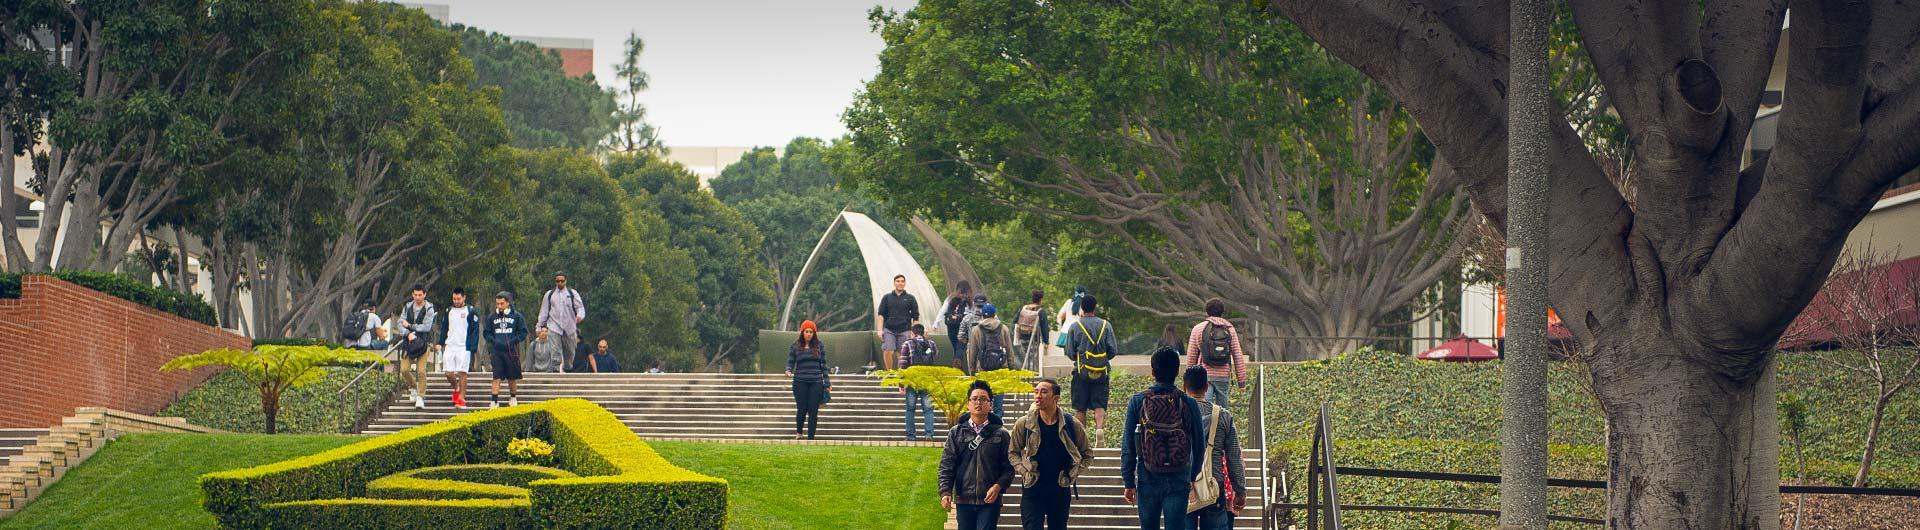 CSULB Campus Steps with Students